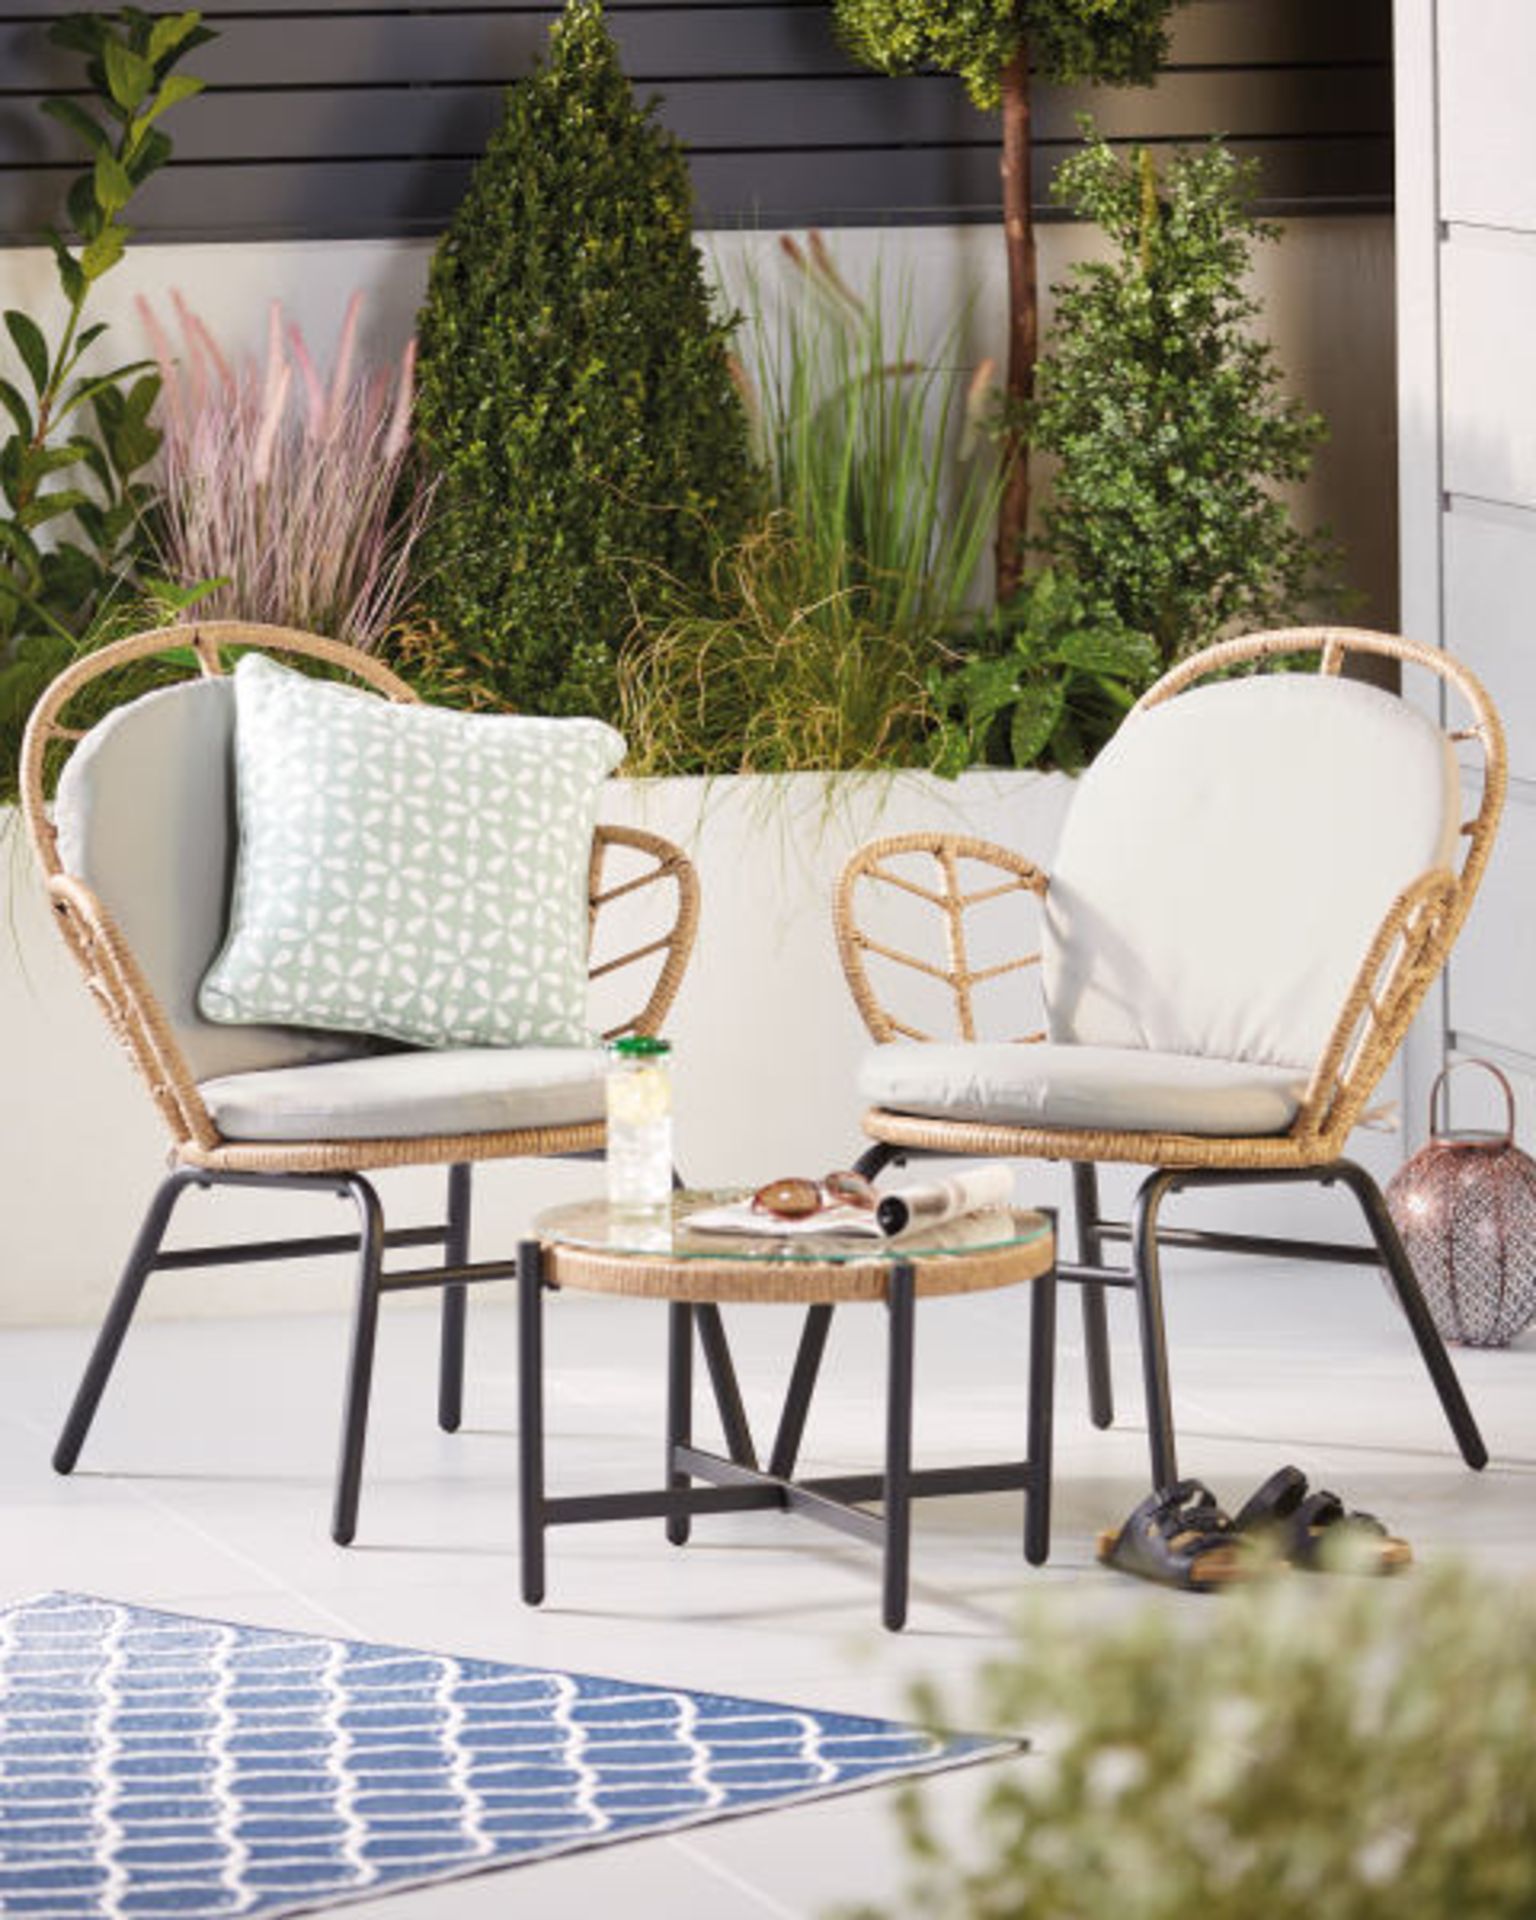 Luxury Petal Rattan Bistro Set. Transform your garden and create a space where you can relax with - Image 2 of 5